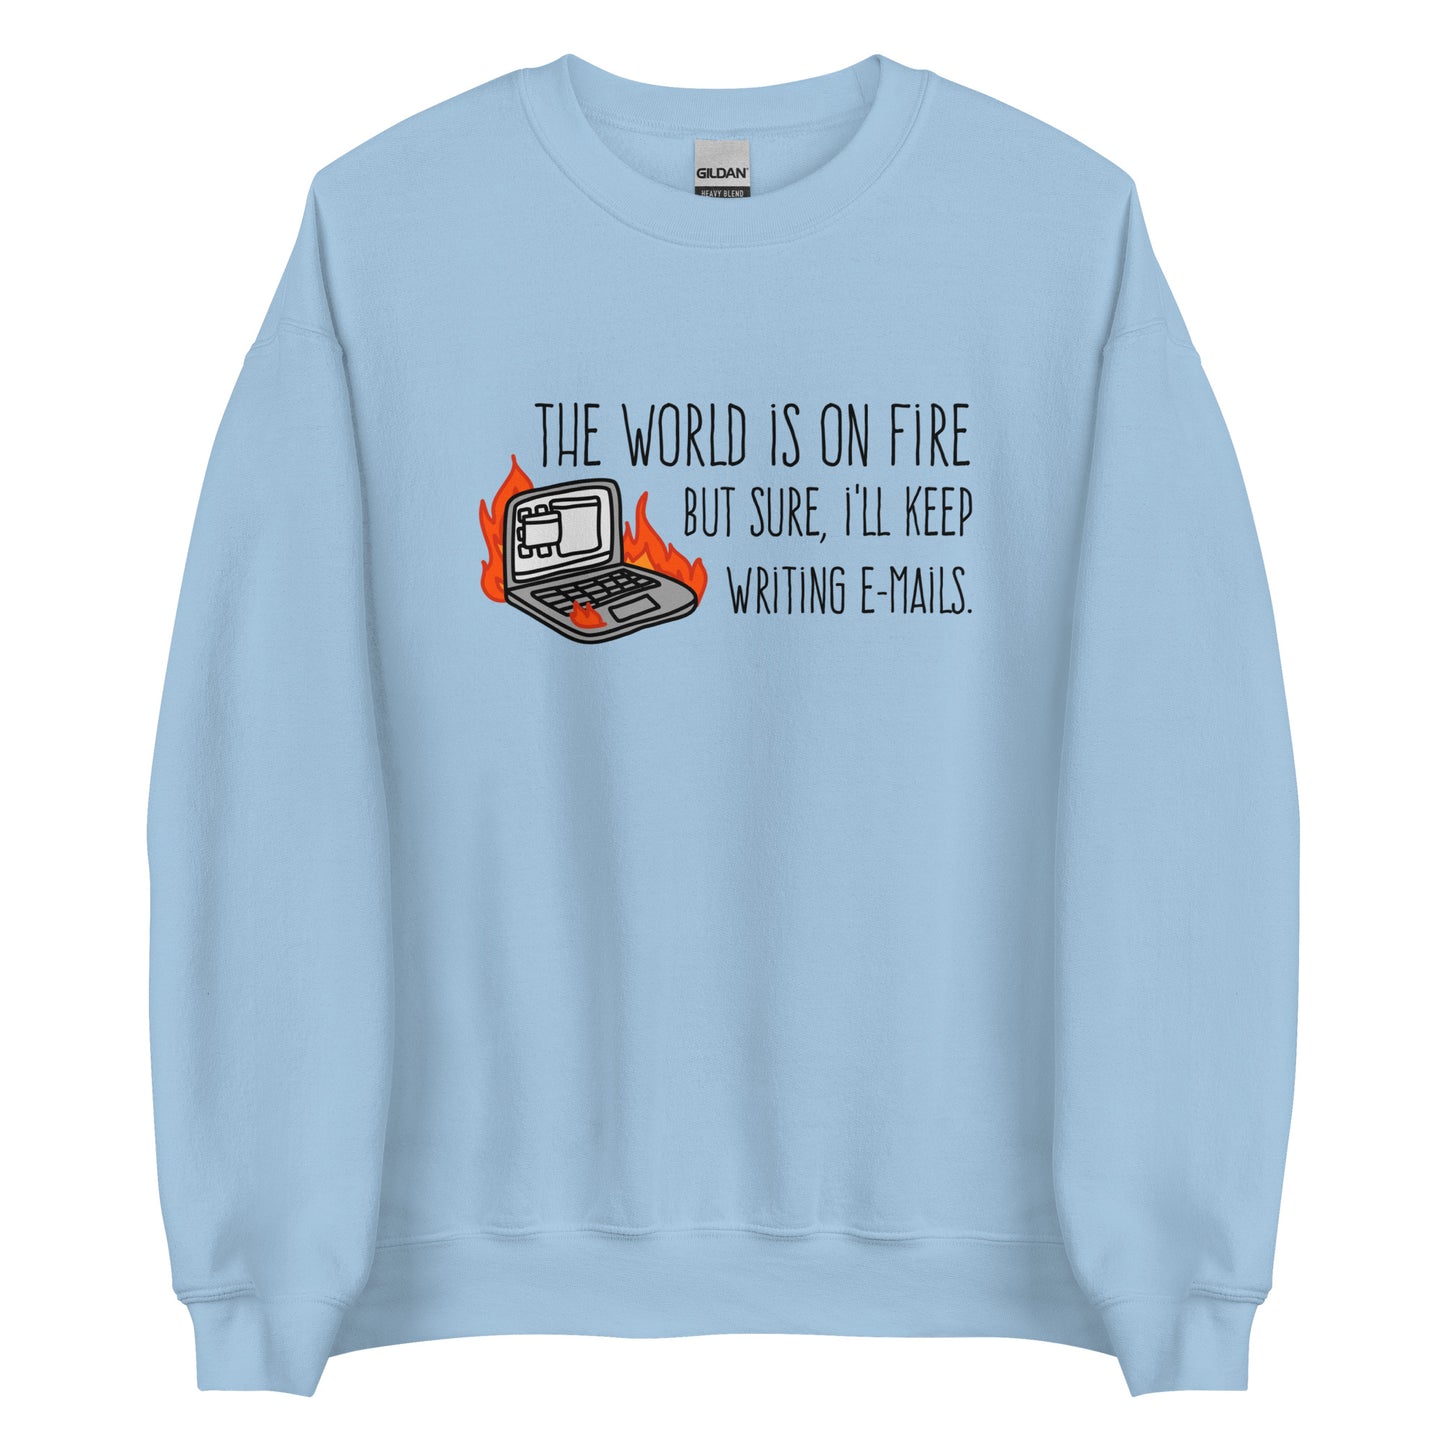 A light blue crewneck sweatshirt featuring a squiggly illustration of a laptop that is on fire. Text alongside the laptop reads "the world is on fire but sure, I'll keep writing e-mails."